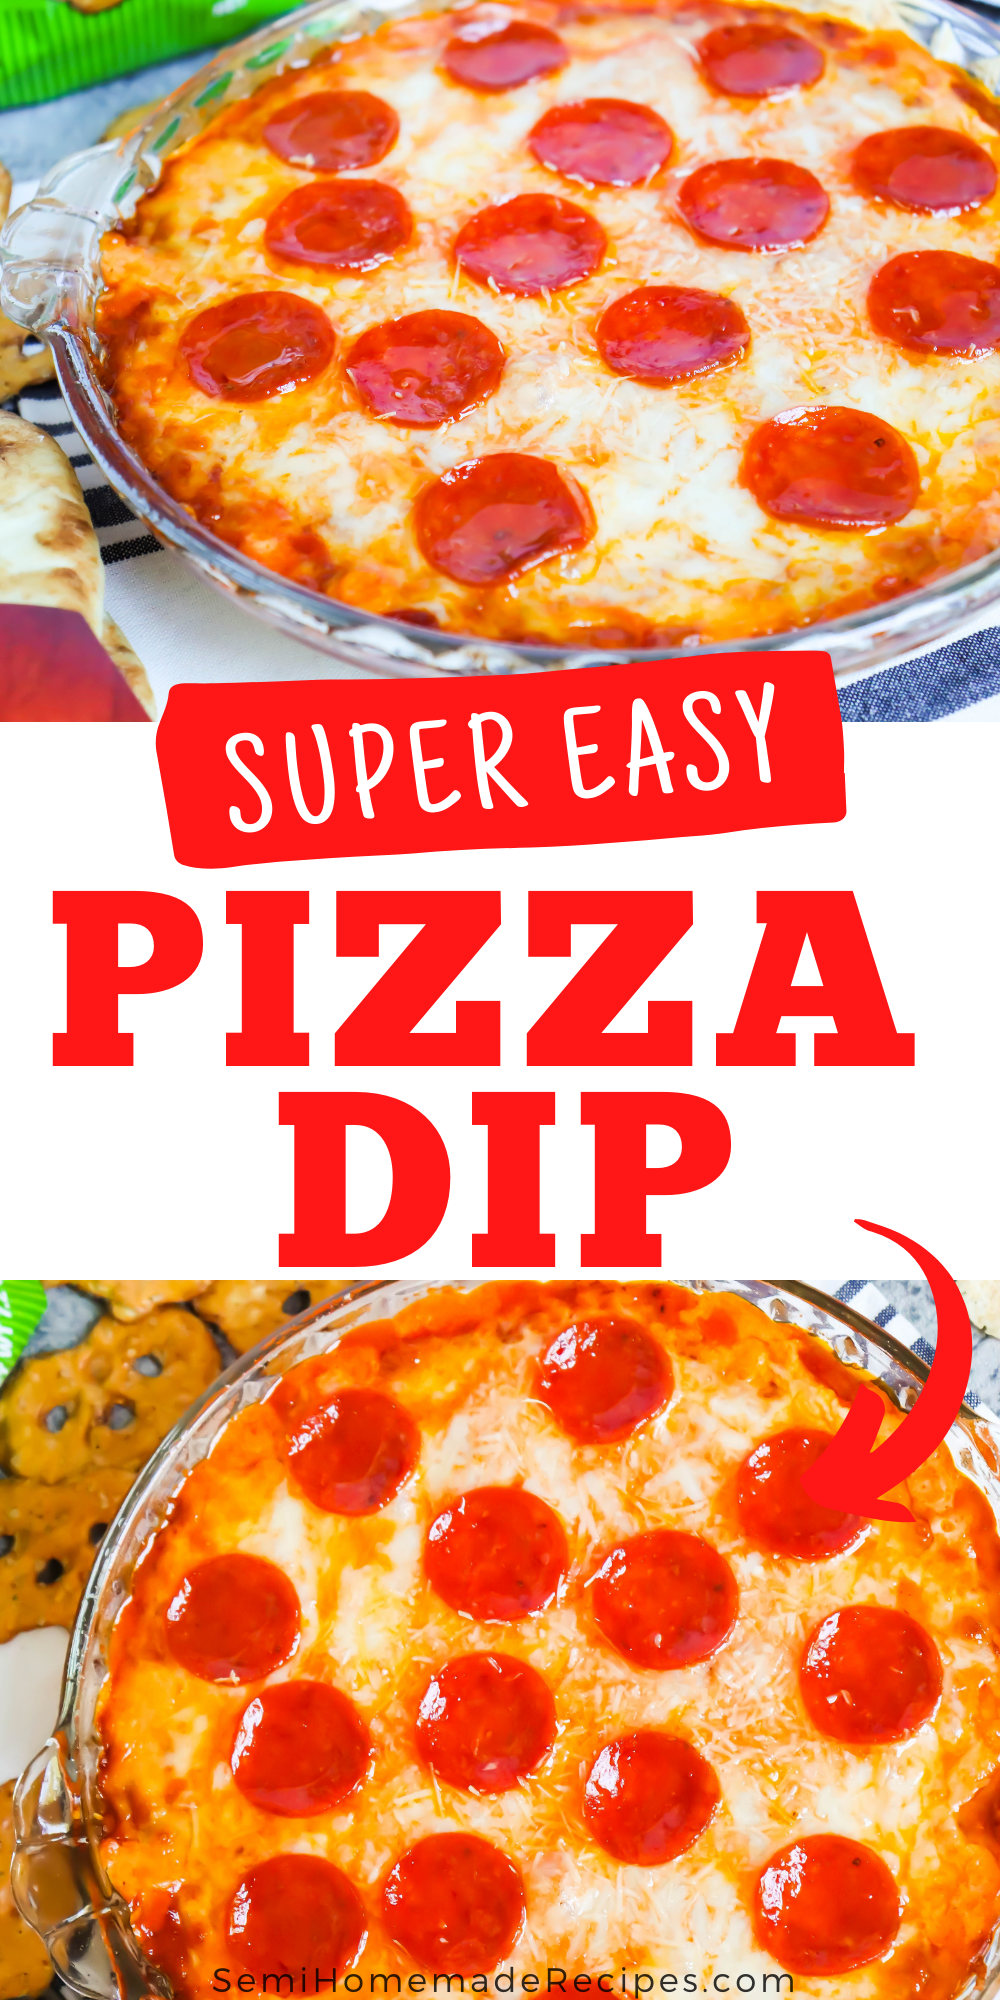 Pizza Dip – layers of cream cheese, parmesan cheese, mozzarella cheese and pizza sauce are topped with more cheese and pepperoni to make this easy pizza party dip! Perfect for serving with pretzels, naan bread, or crispy cheese wisps.